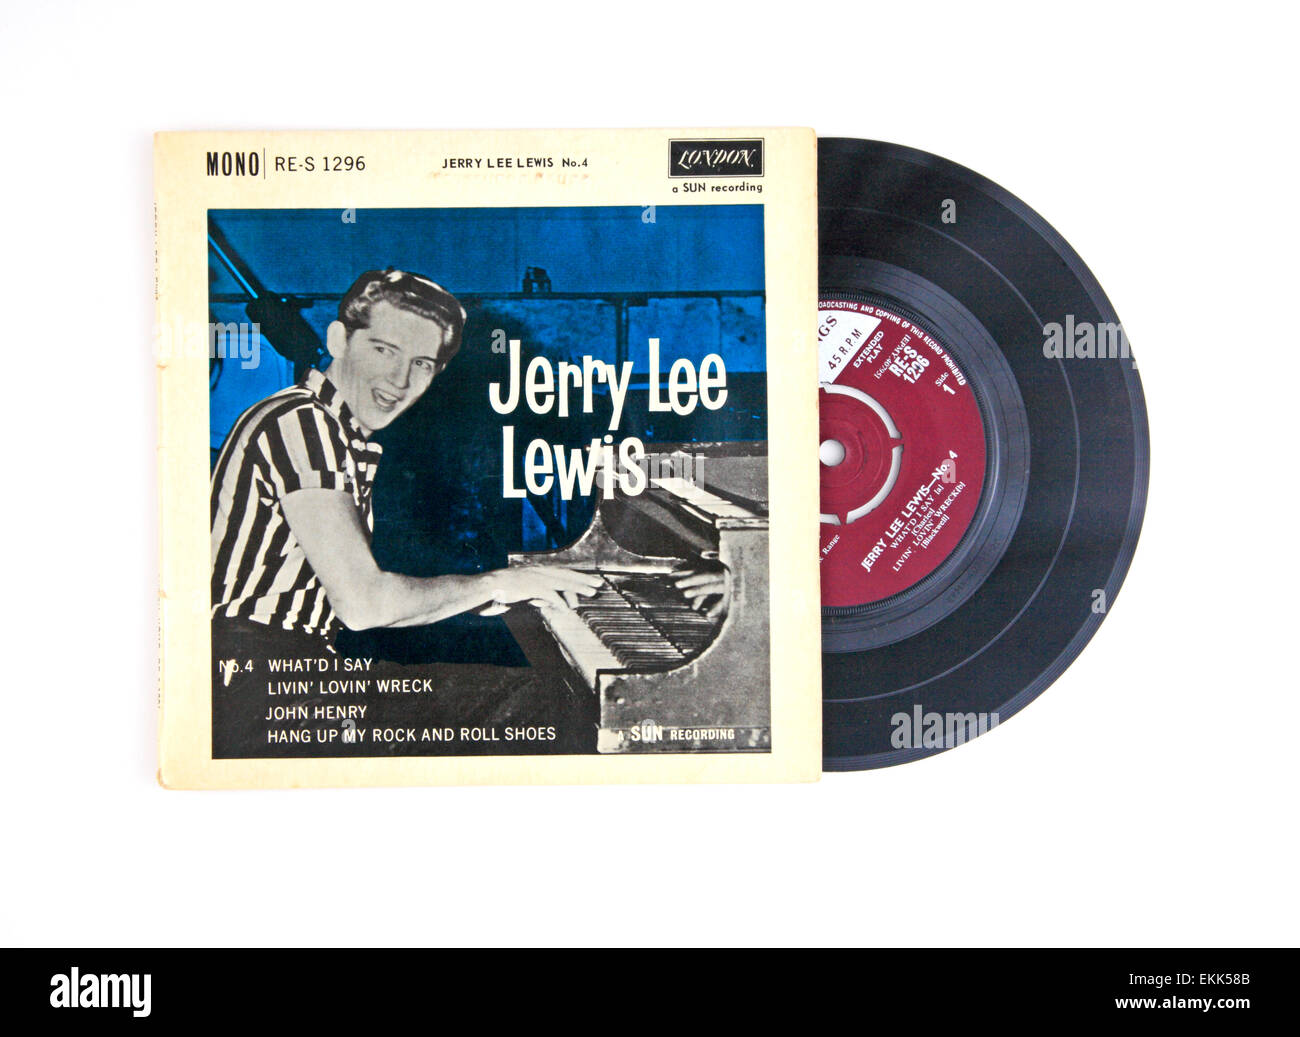 Extended play vinyl record and cover by Jerry Lee Lewis featuring What'd I Say. Stock Photo